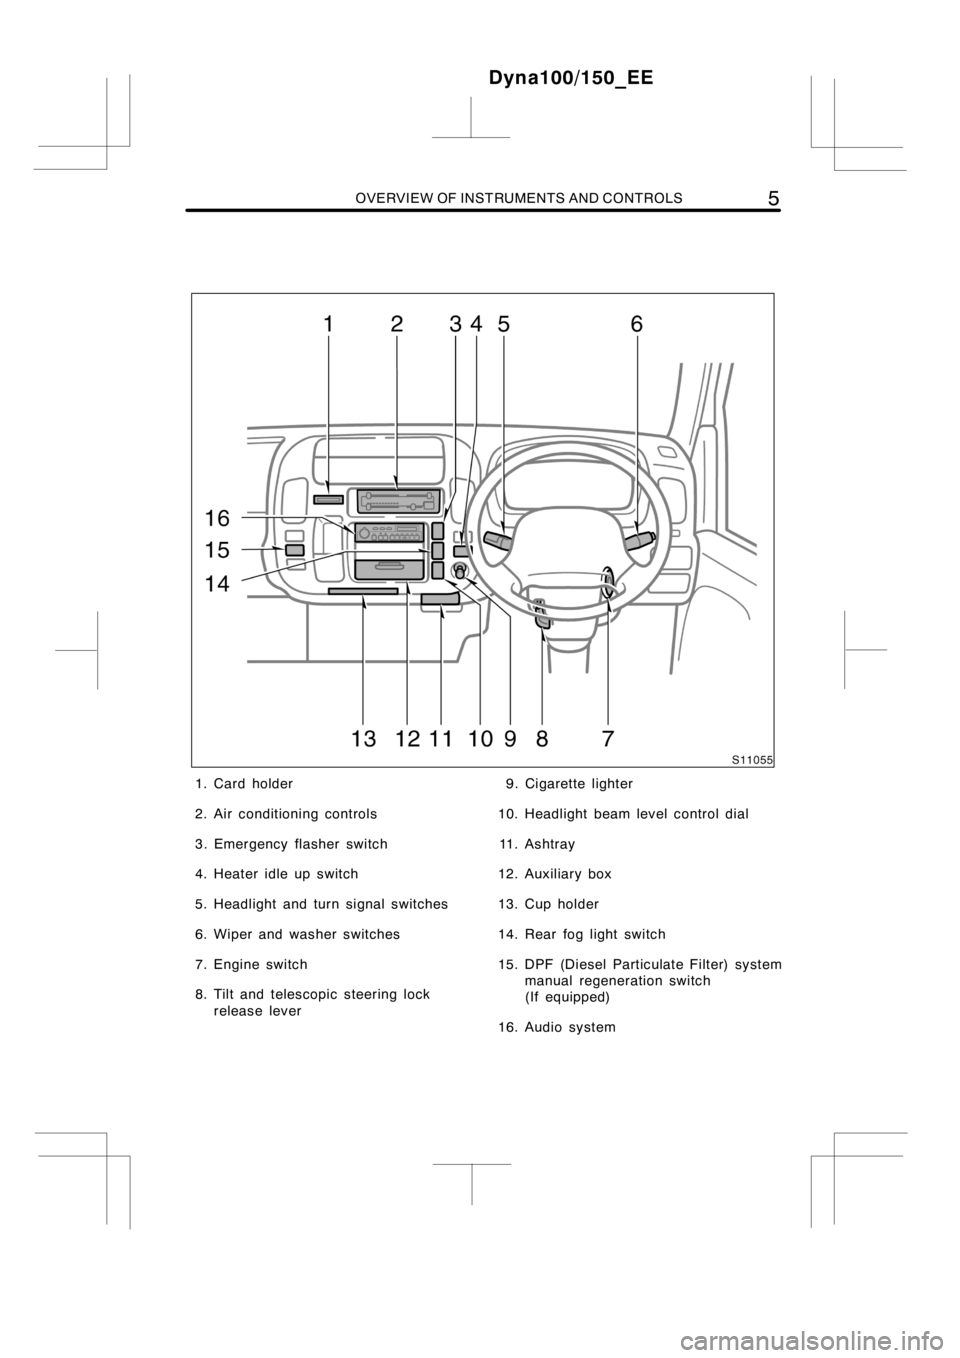 TOYOTA DYNA 100/150 2012  Owners Manual (in English) OVERVIEW OF INSTRUMENTS AND CONTROLS5
1. Card holder
2. Air conditioning controls
3. Emergency flasher switch
4. Heater idle up switch
5. Headlight and turn signal switches
6. Wiper and washer switche